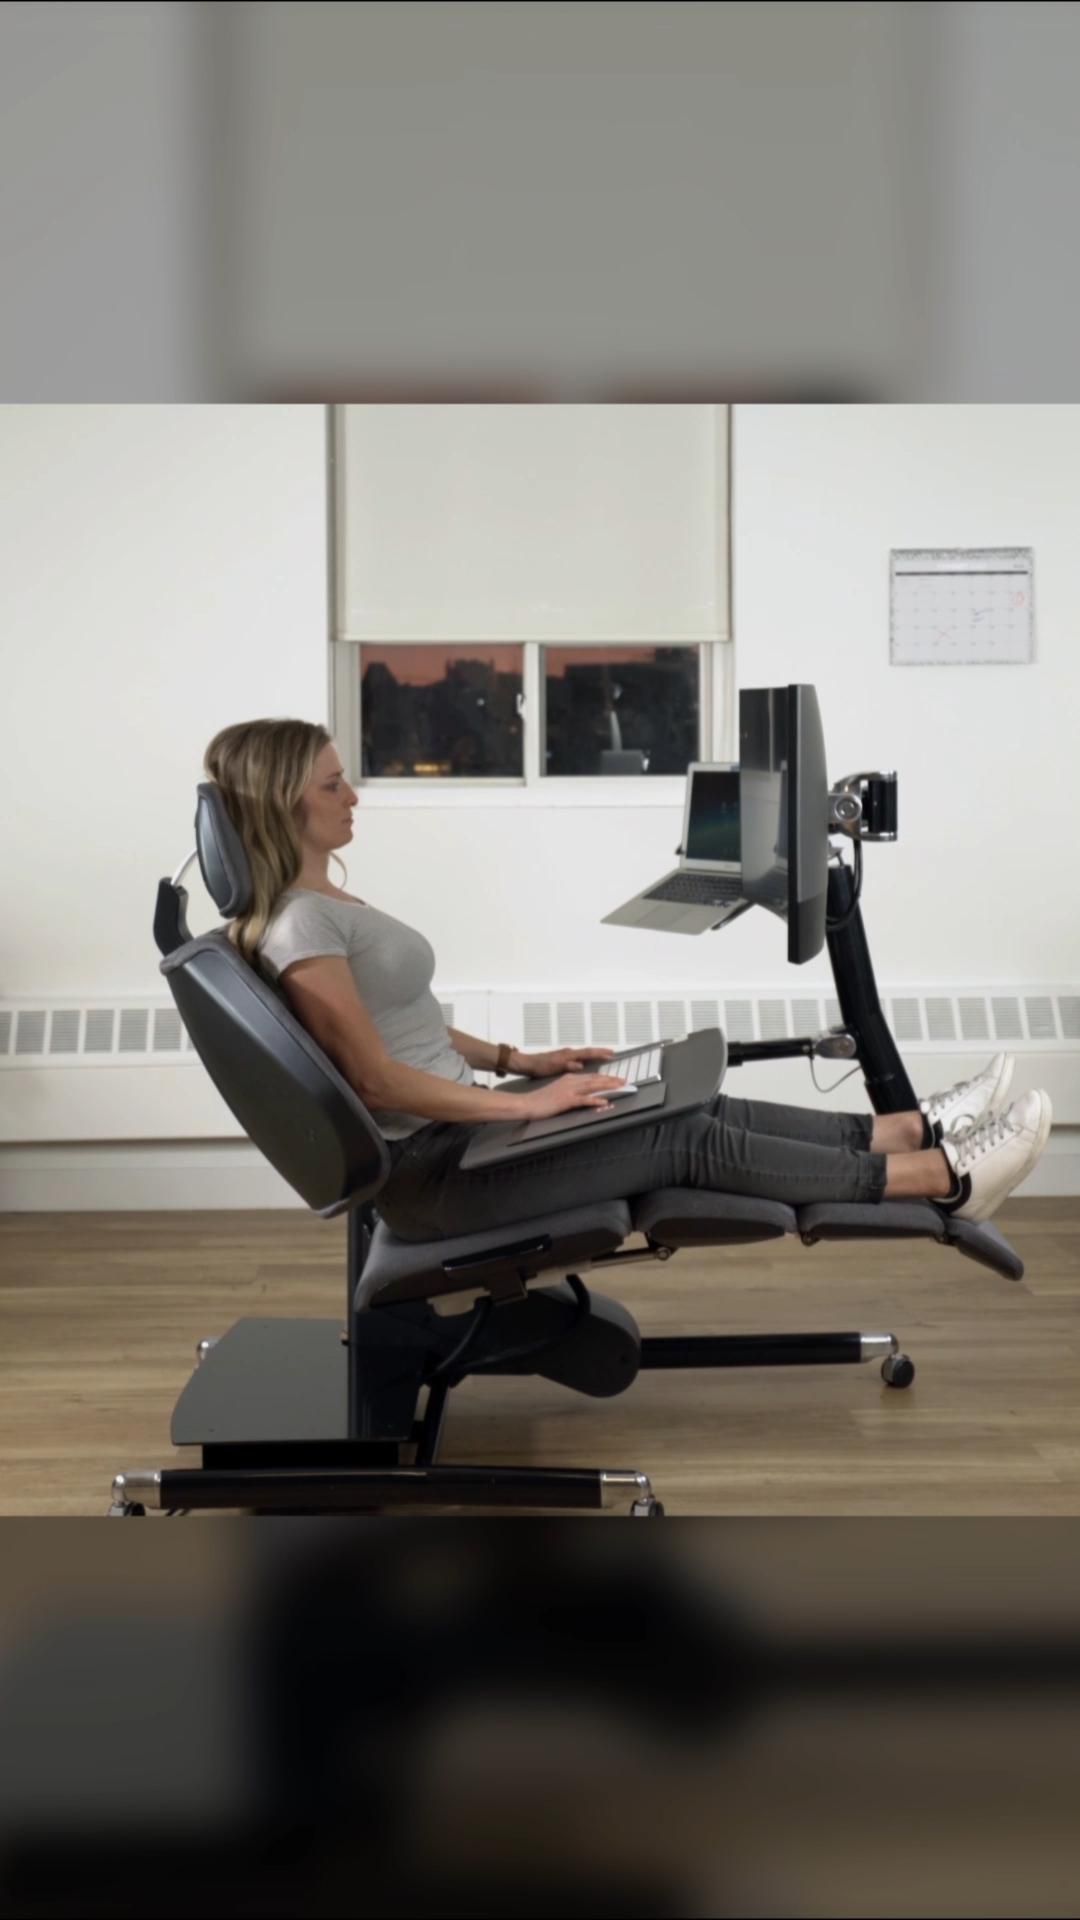 Work in Comfort: Stay Focused with Computer Chairs